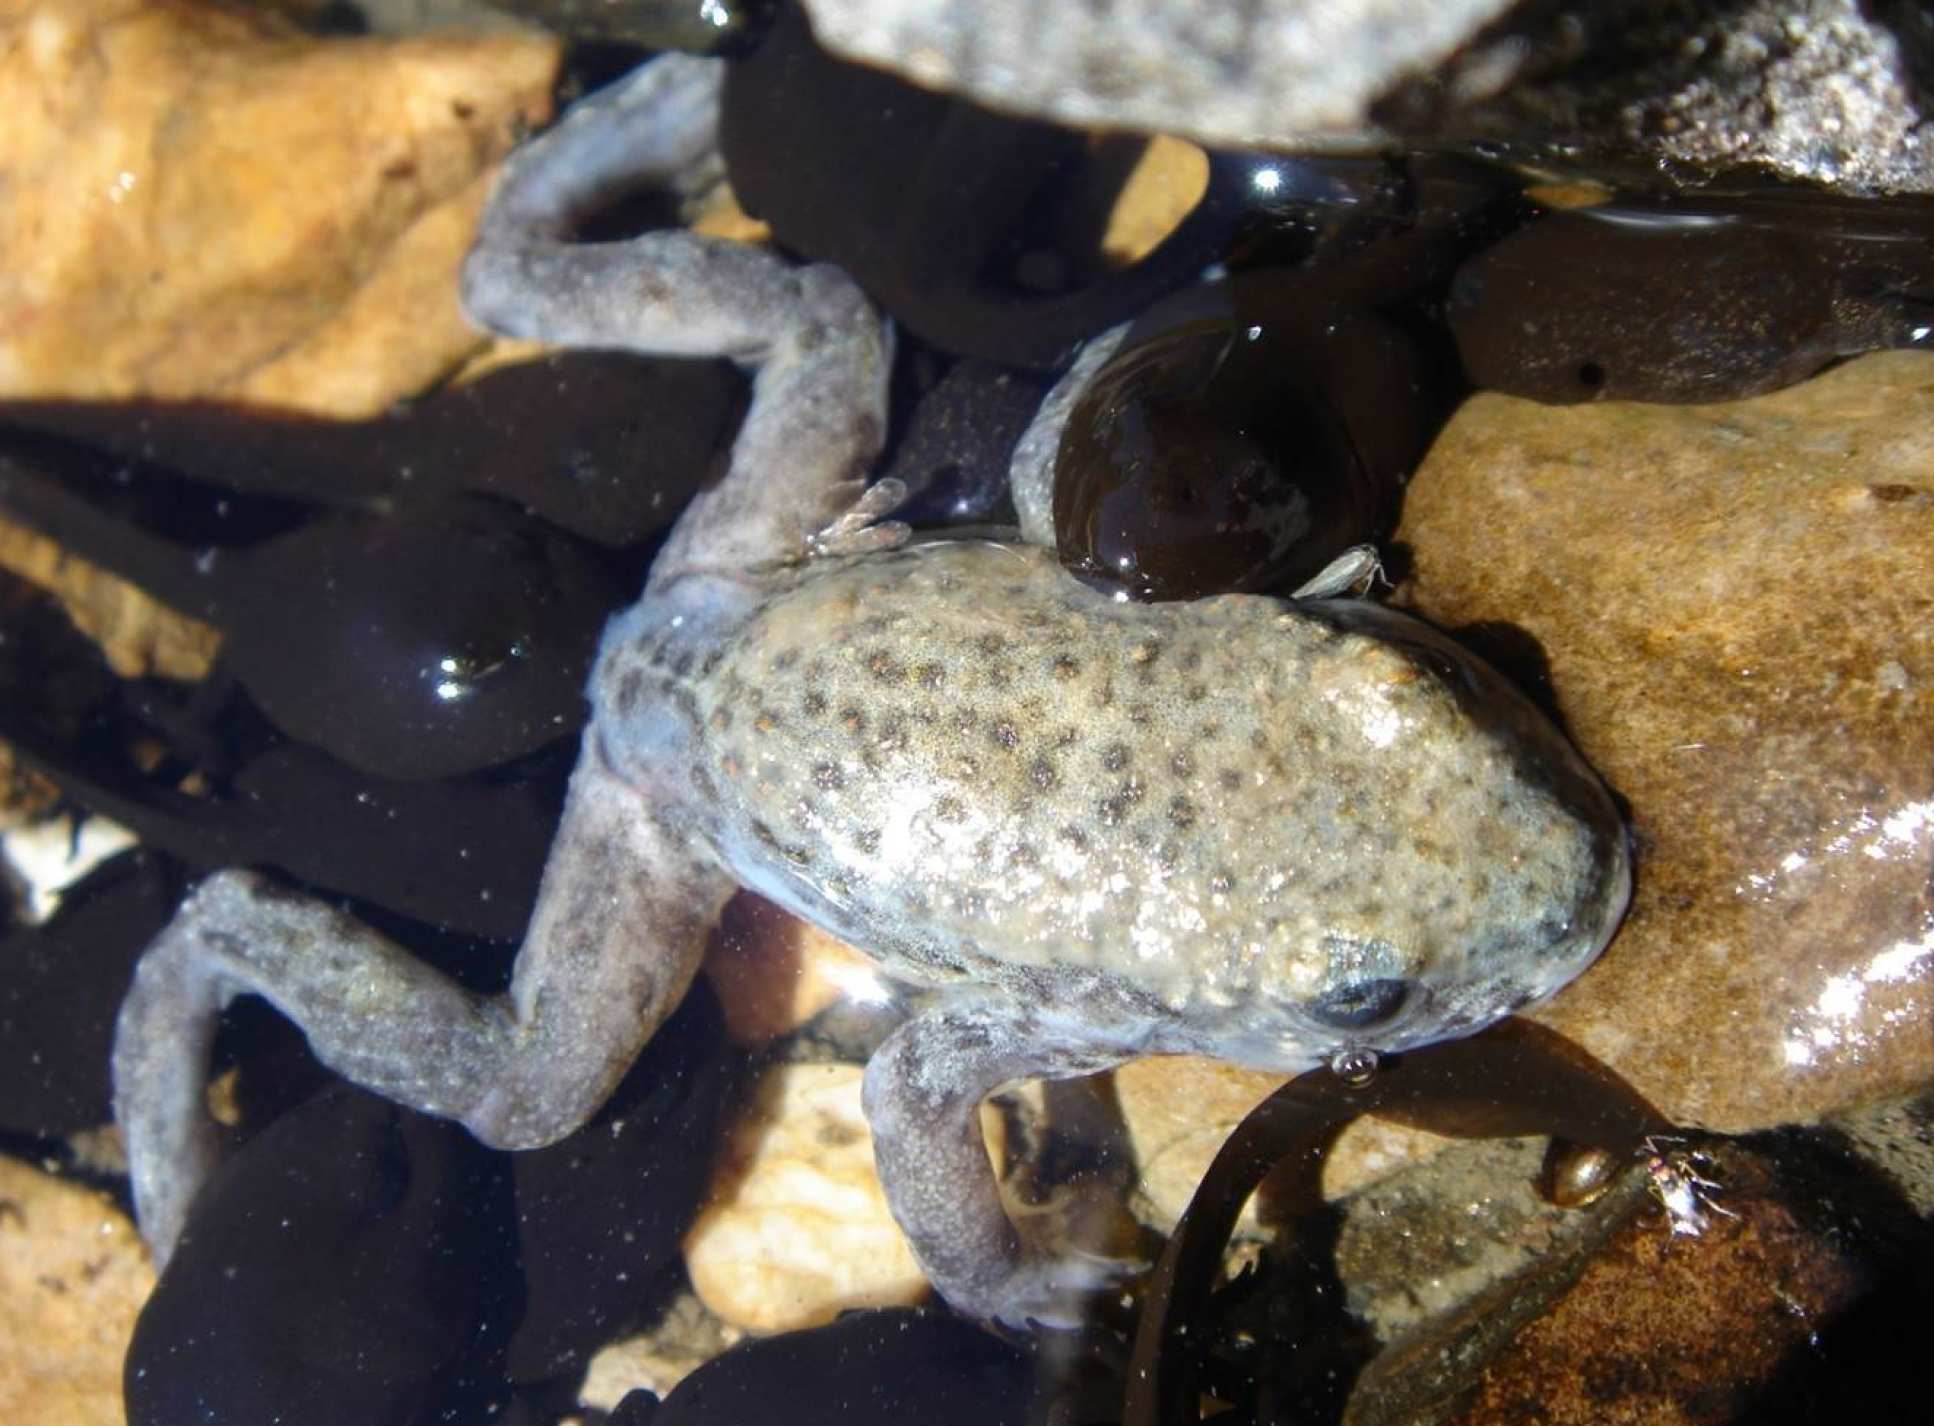 A midwife toad killed by chytrid